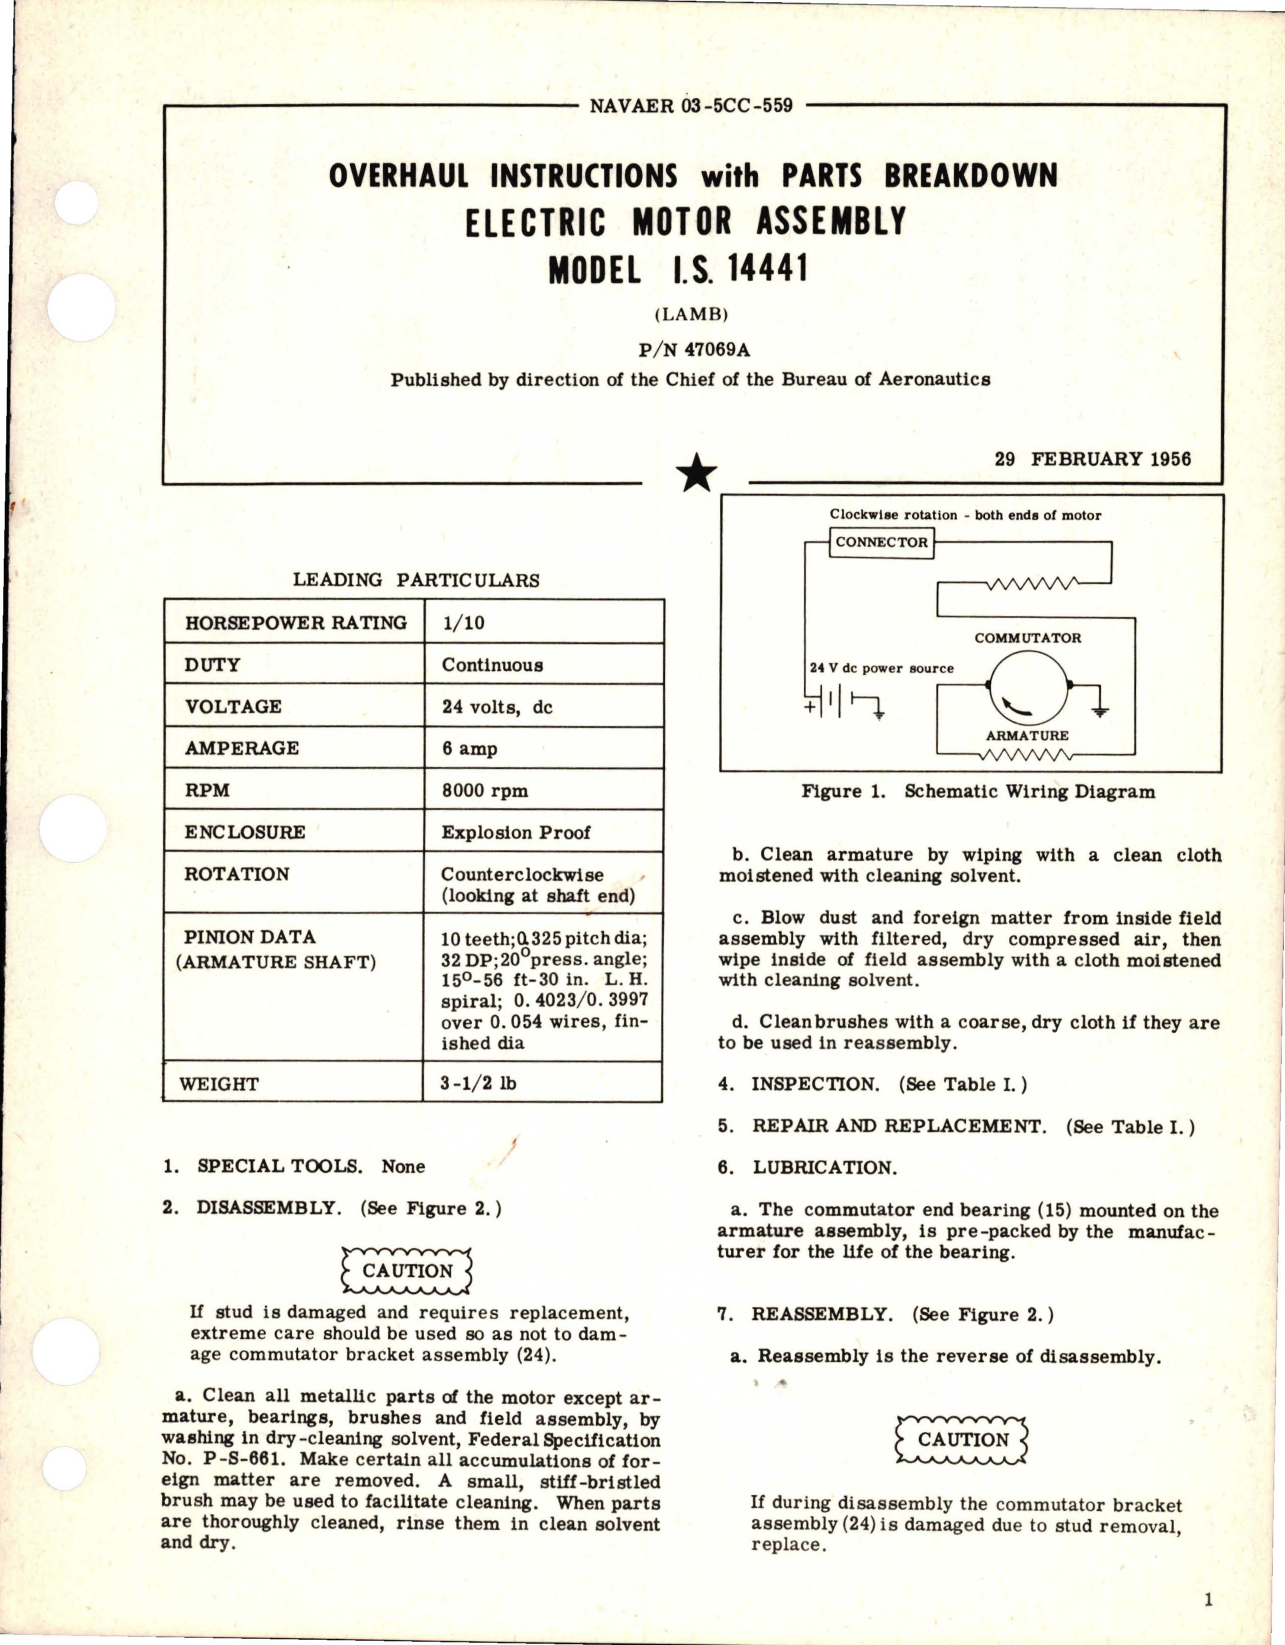 Sample page 1 from AirCorps Library document: Overhaul Instructions with Parts Breakdown for Electric Motor Assembly - Model I.S. 14441 